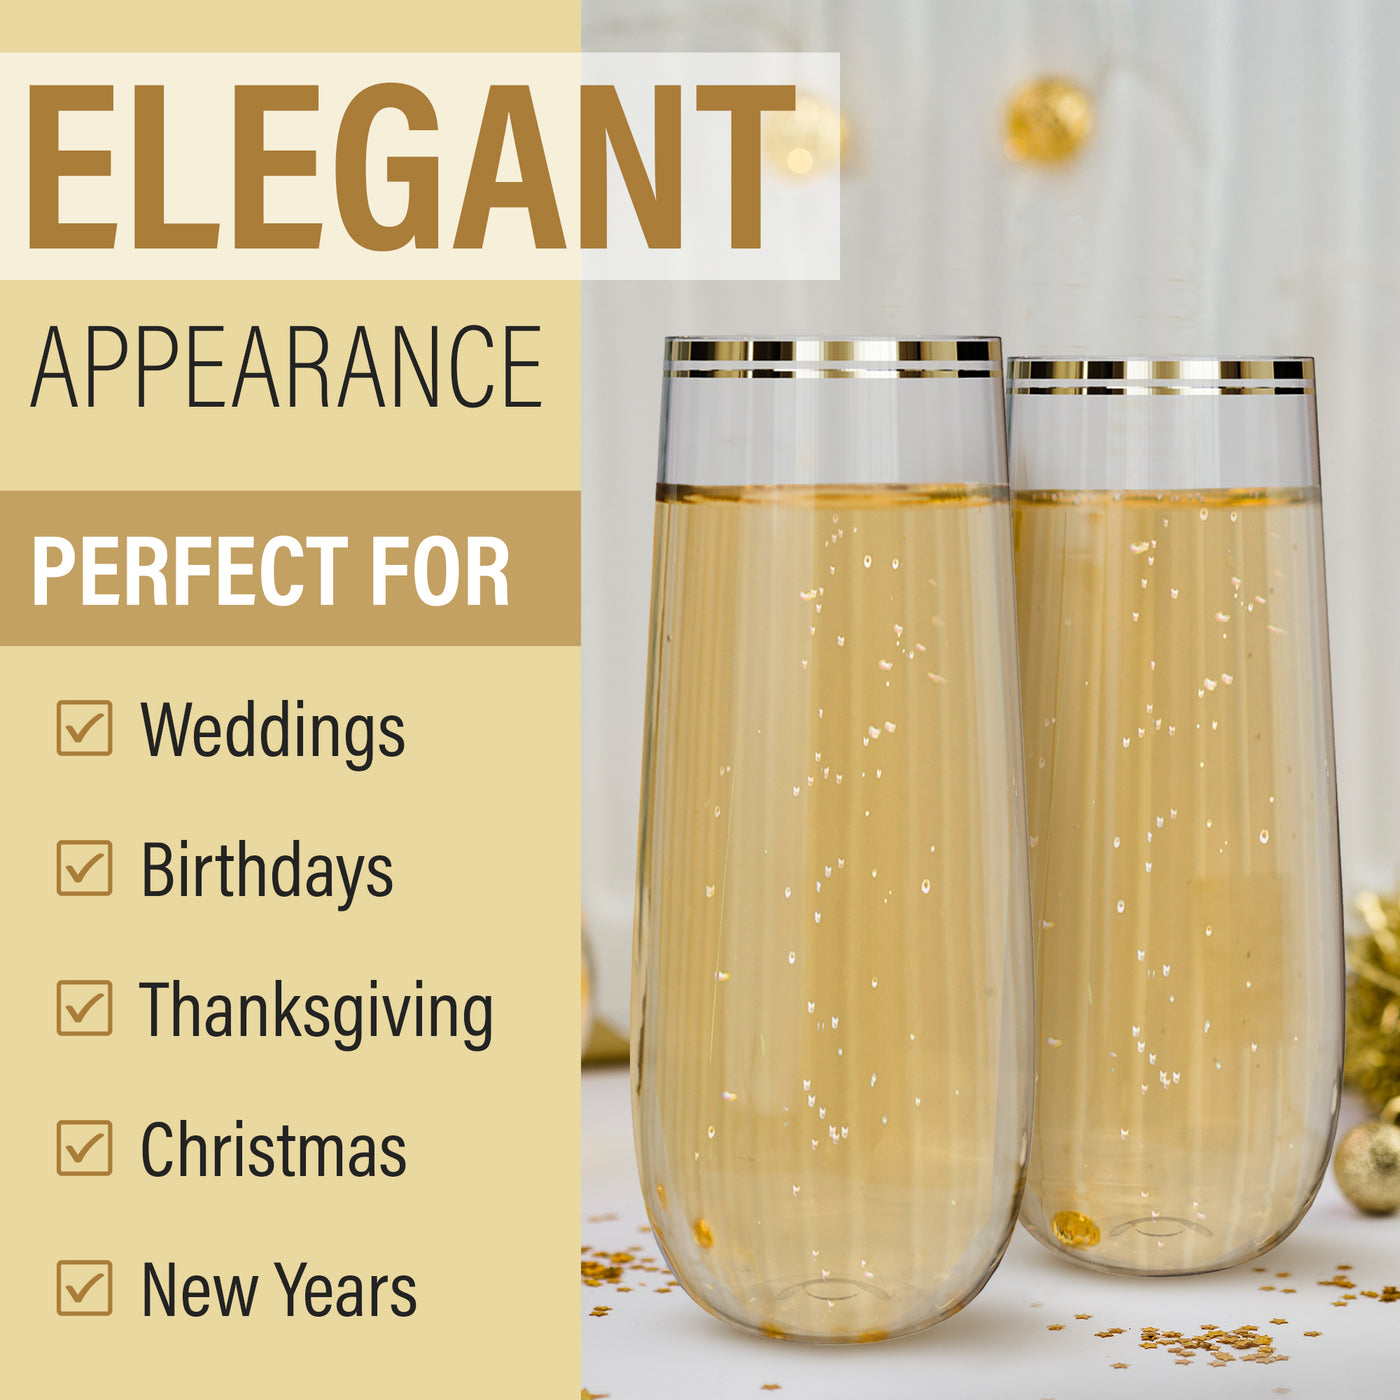 Perfect Settings 24 Premium Clear Plastic Reusable Unbreakable Champagne Flutes / Holiday Gathering or Wedding Party - Perfect Settings Tableware